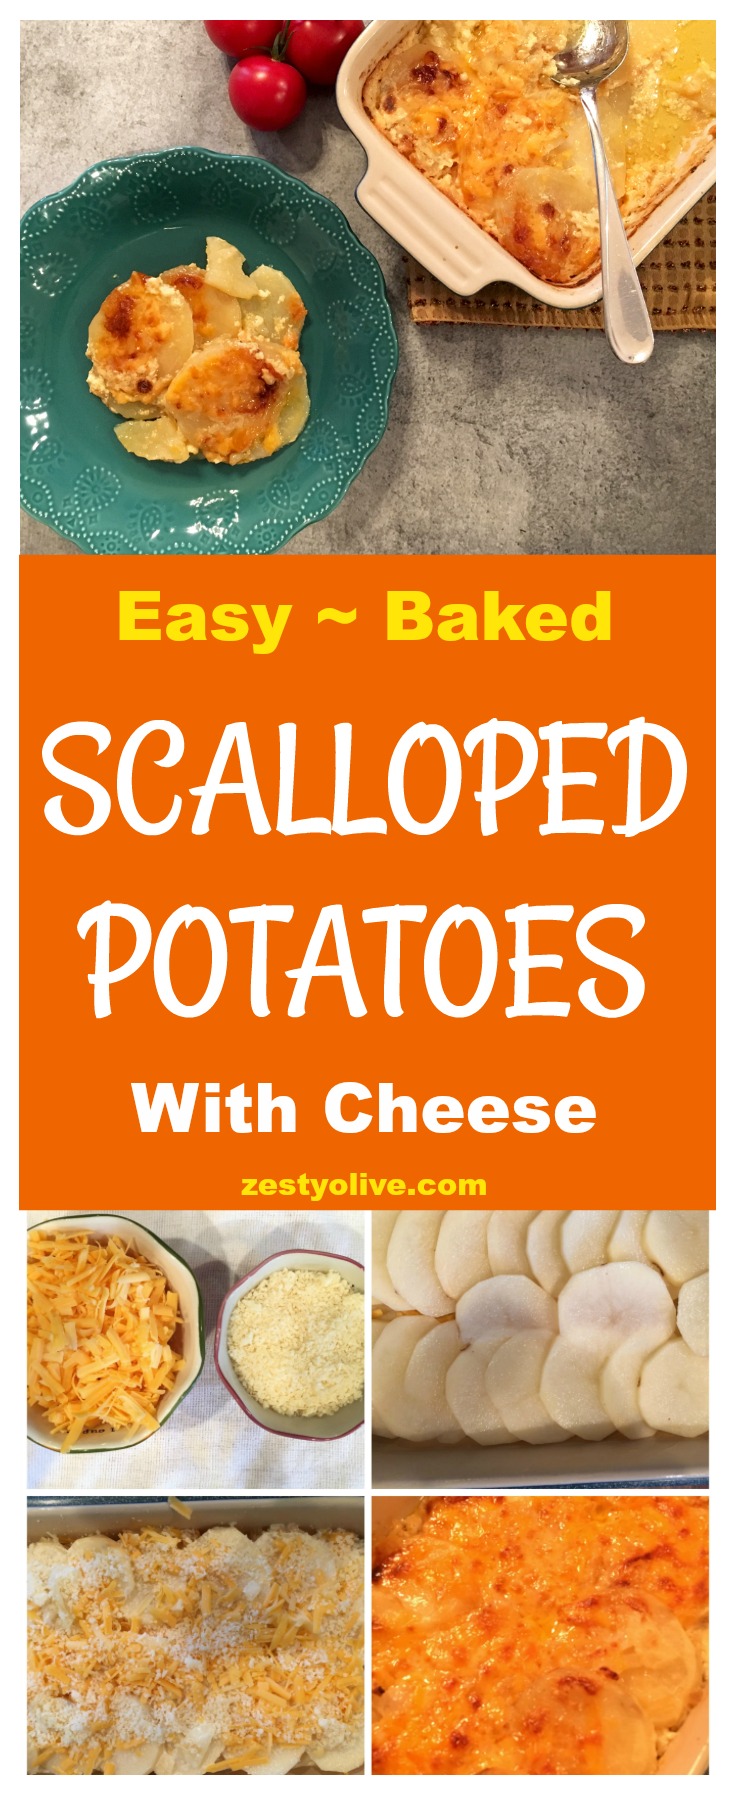 If you love potatoes and love cheese, then these baked scalloped potatoes with cheese will rock your world. They are so easy to make, and if you have leftovers, they are even better the next day. It's true!